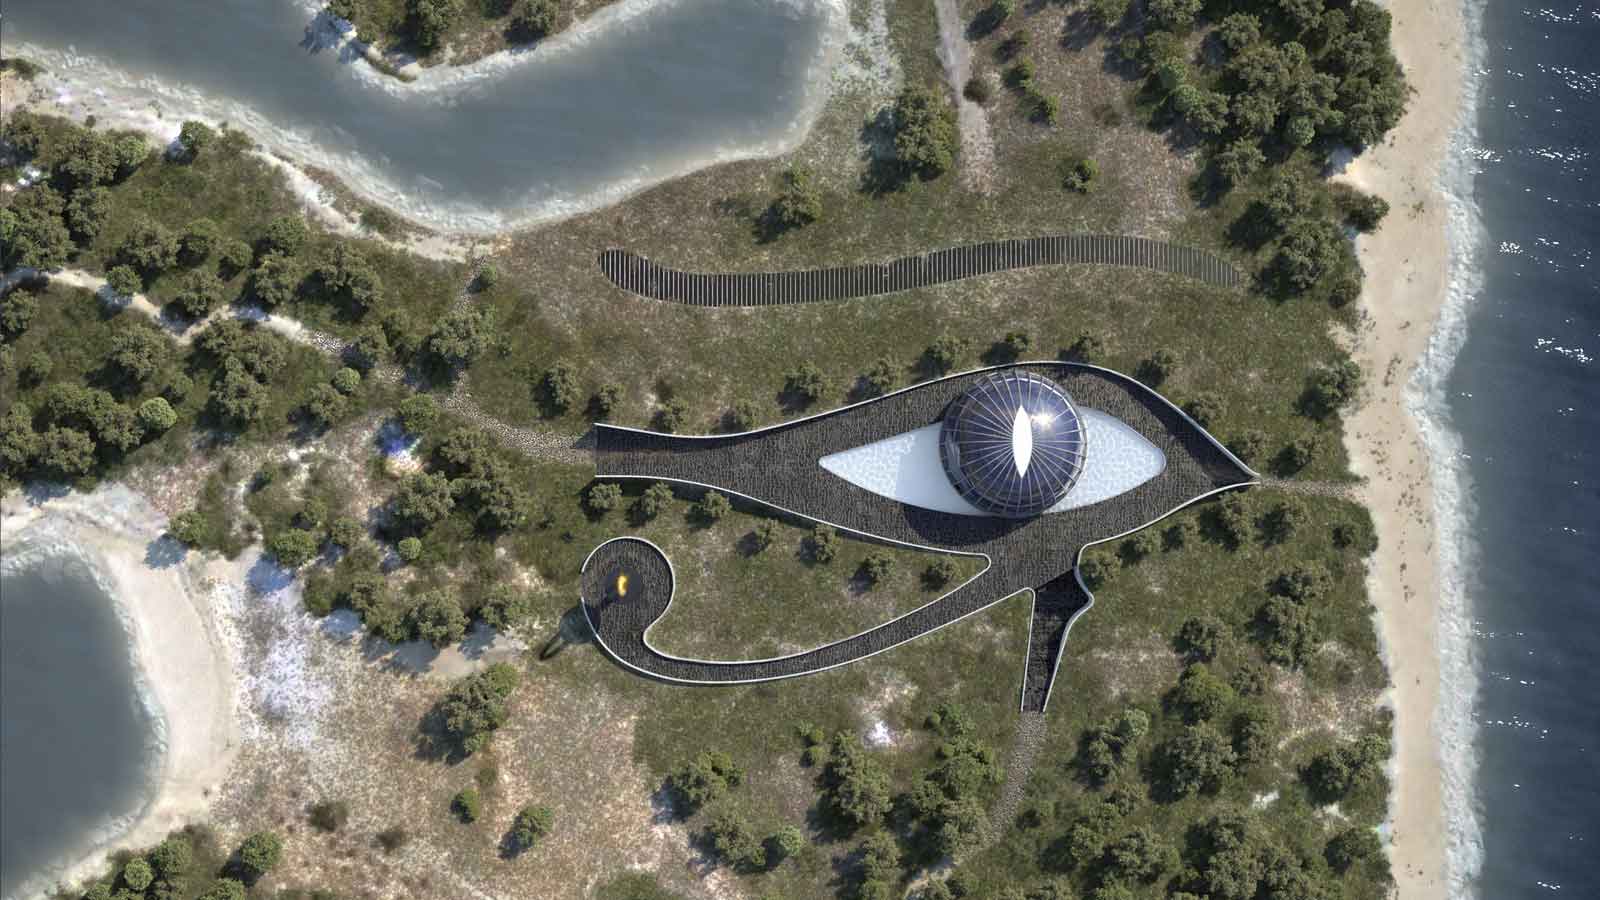 Incredible Self-Sufficient Home That Resembles The Eye Of Horus...